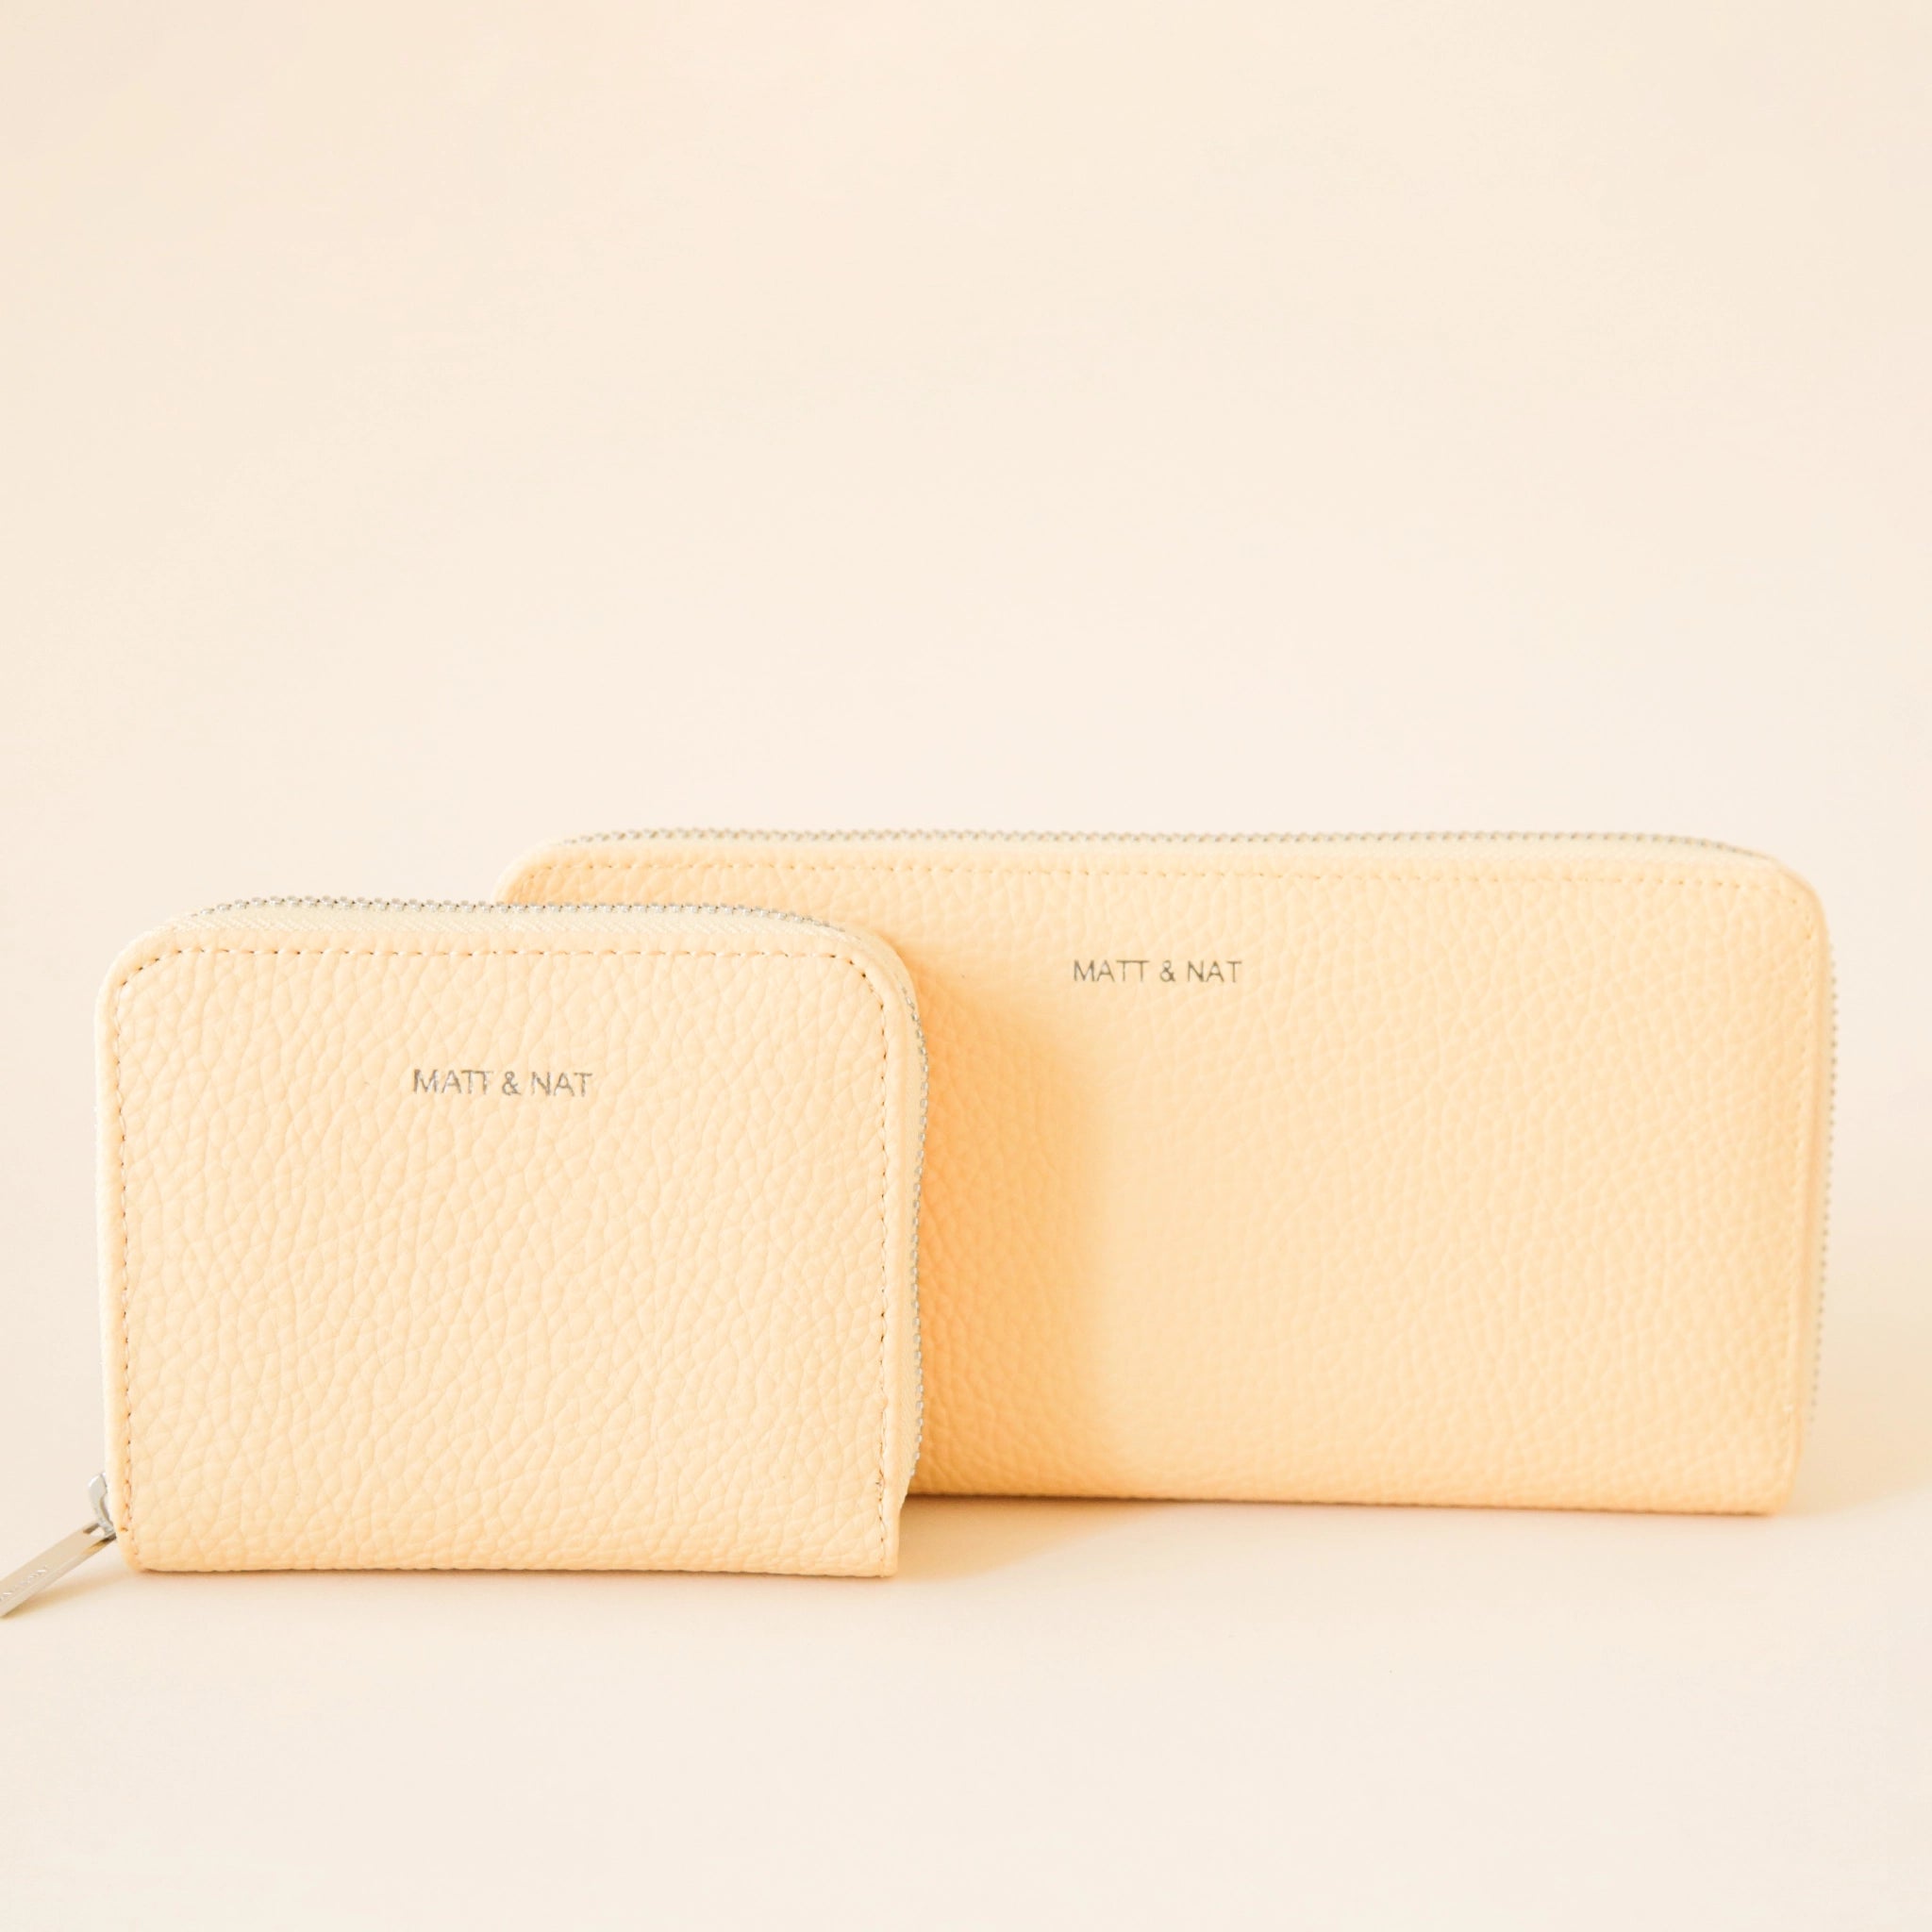 On a cream background is a light yellow zip wallet with silver detailing and &quot;Matt &amp; Nat&quot; written tiny on the front of the wallet, photographed with a smaller square shaped wallet. 